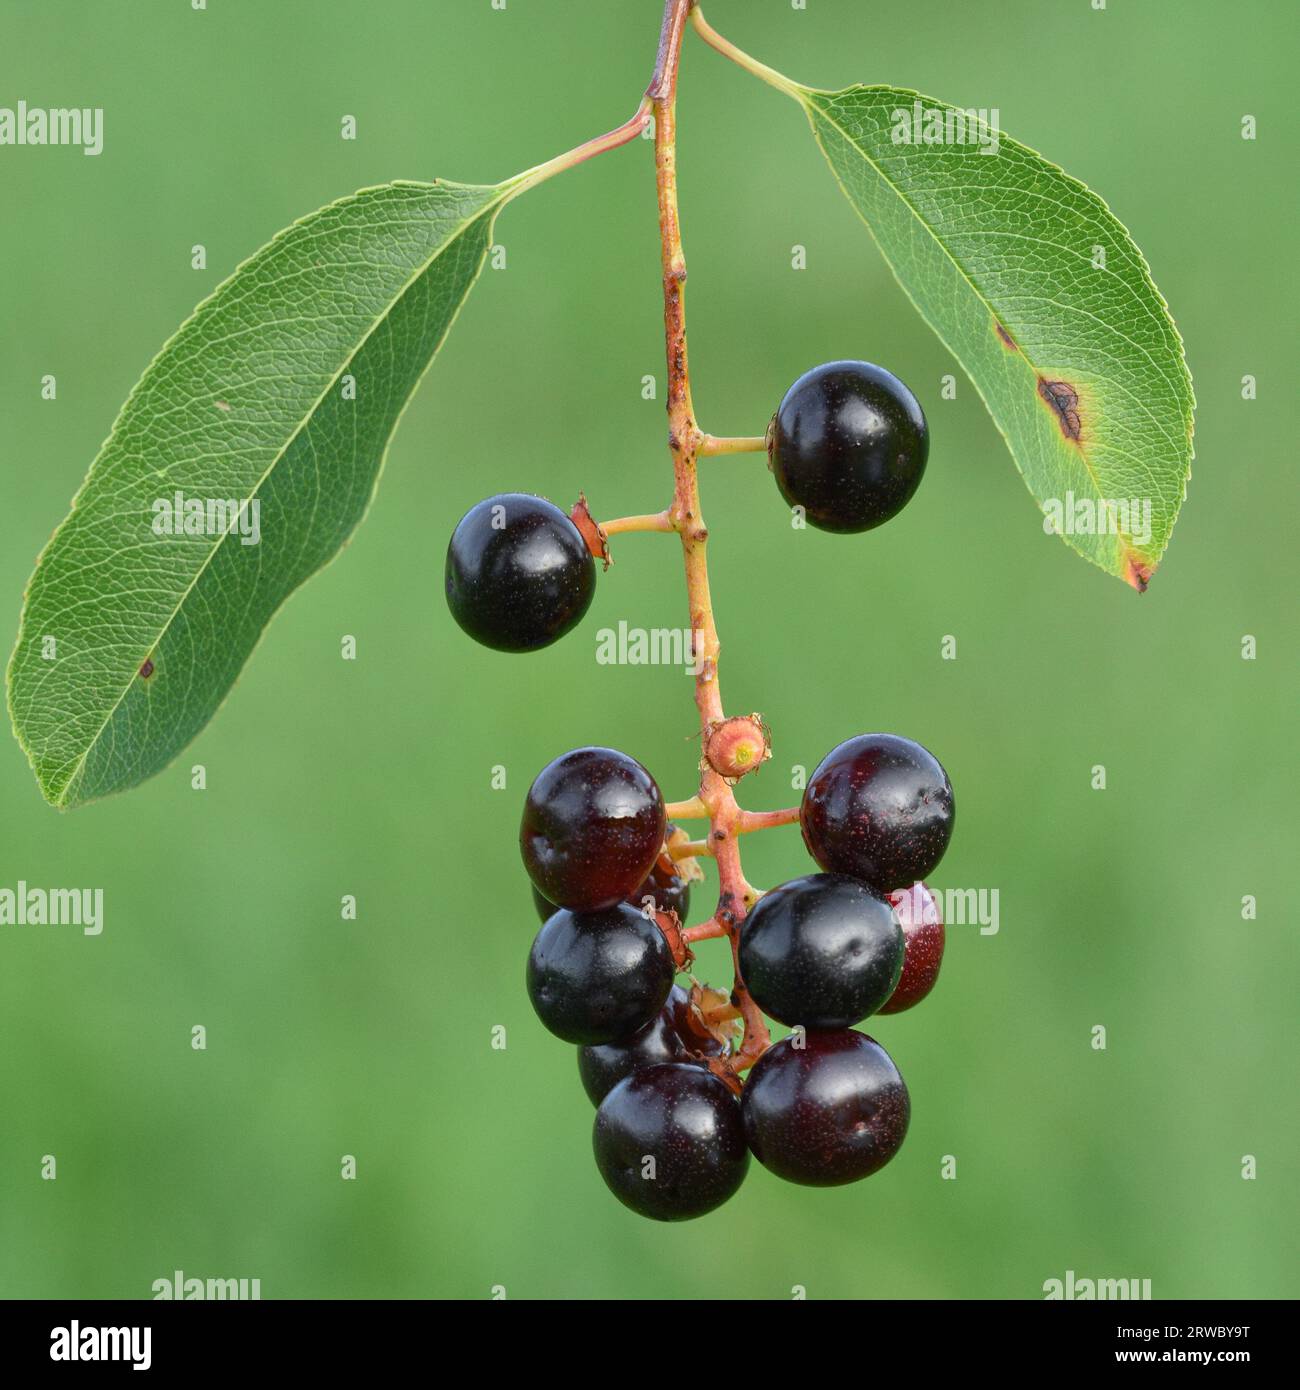 Dark red to black spherical fruits or berries and two green leaves from a Black Cherry tree, green background (Prunus serotina) Stock Photo